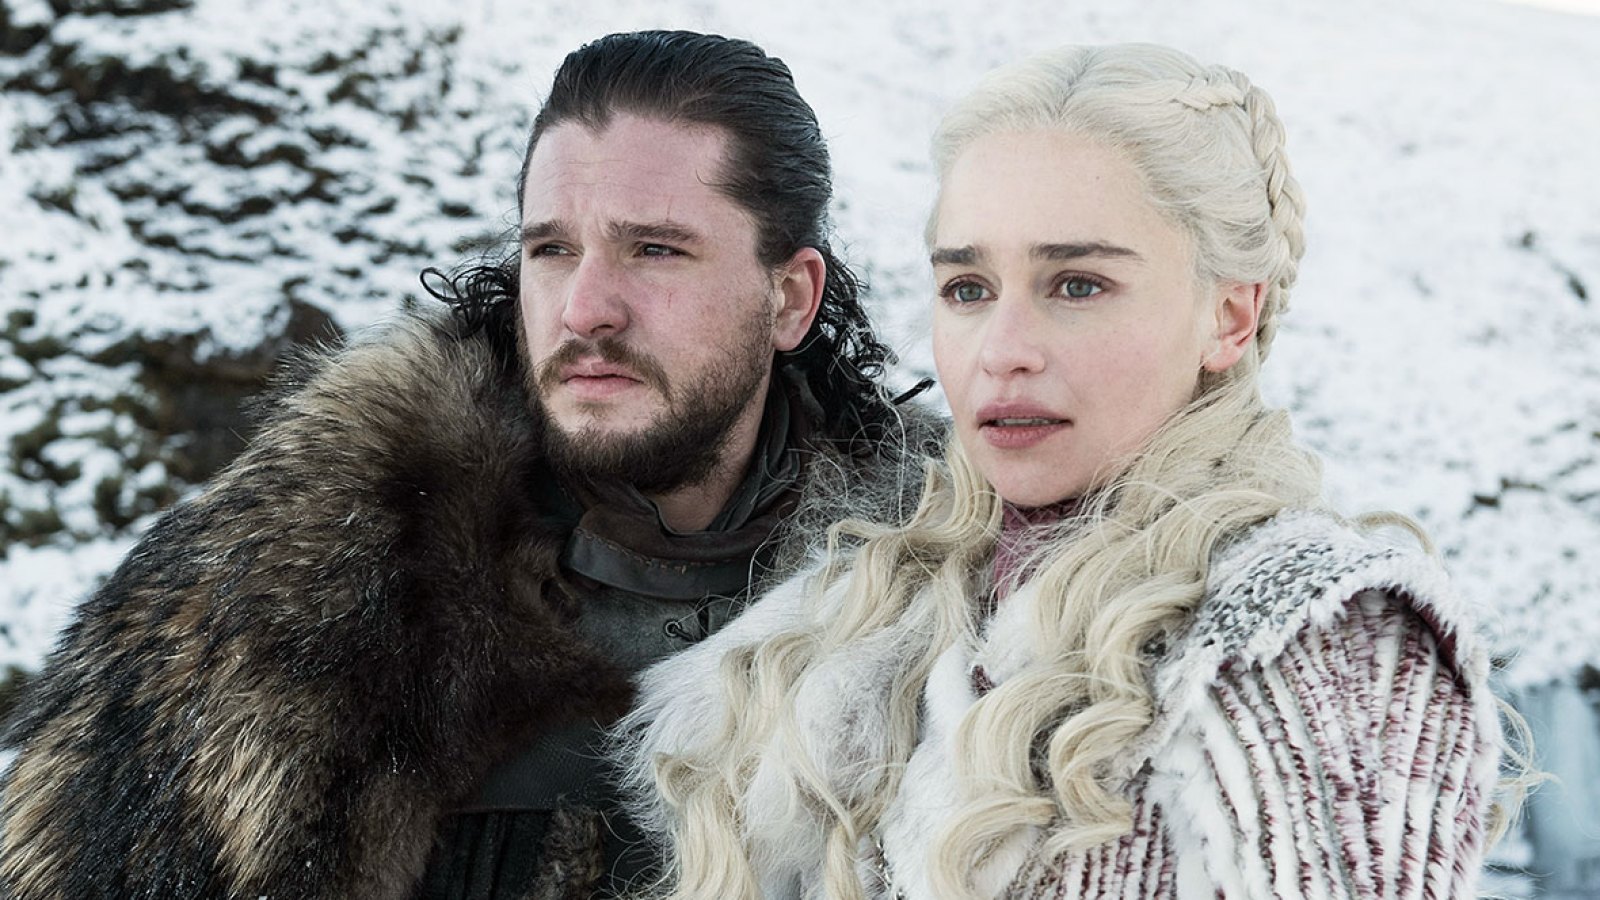 Who's In The Game Of Thrones Cast For Season 8? Emilia Clarke